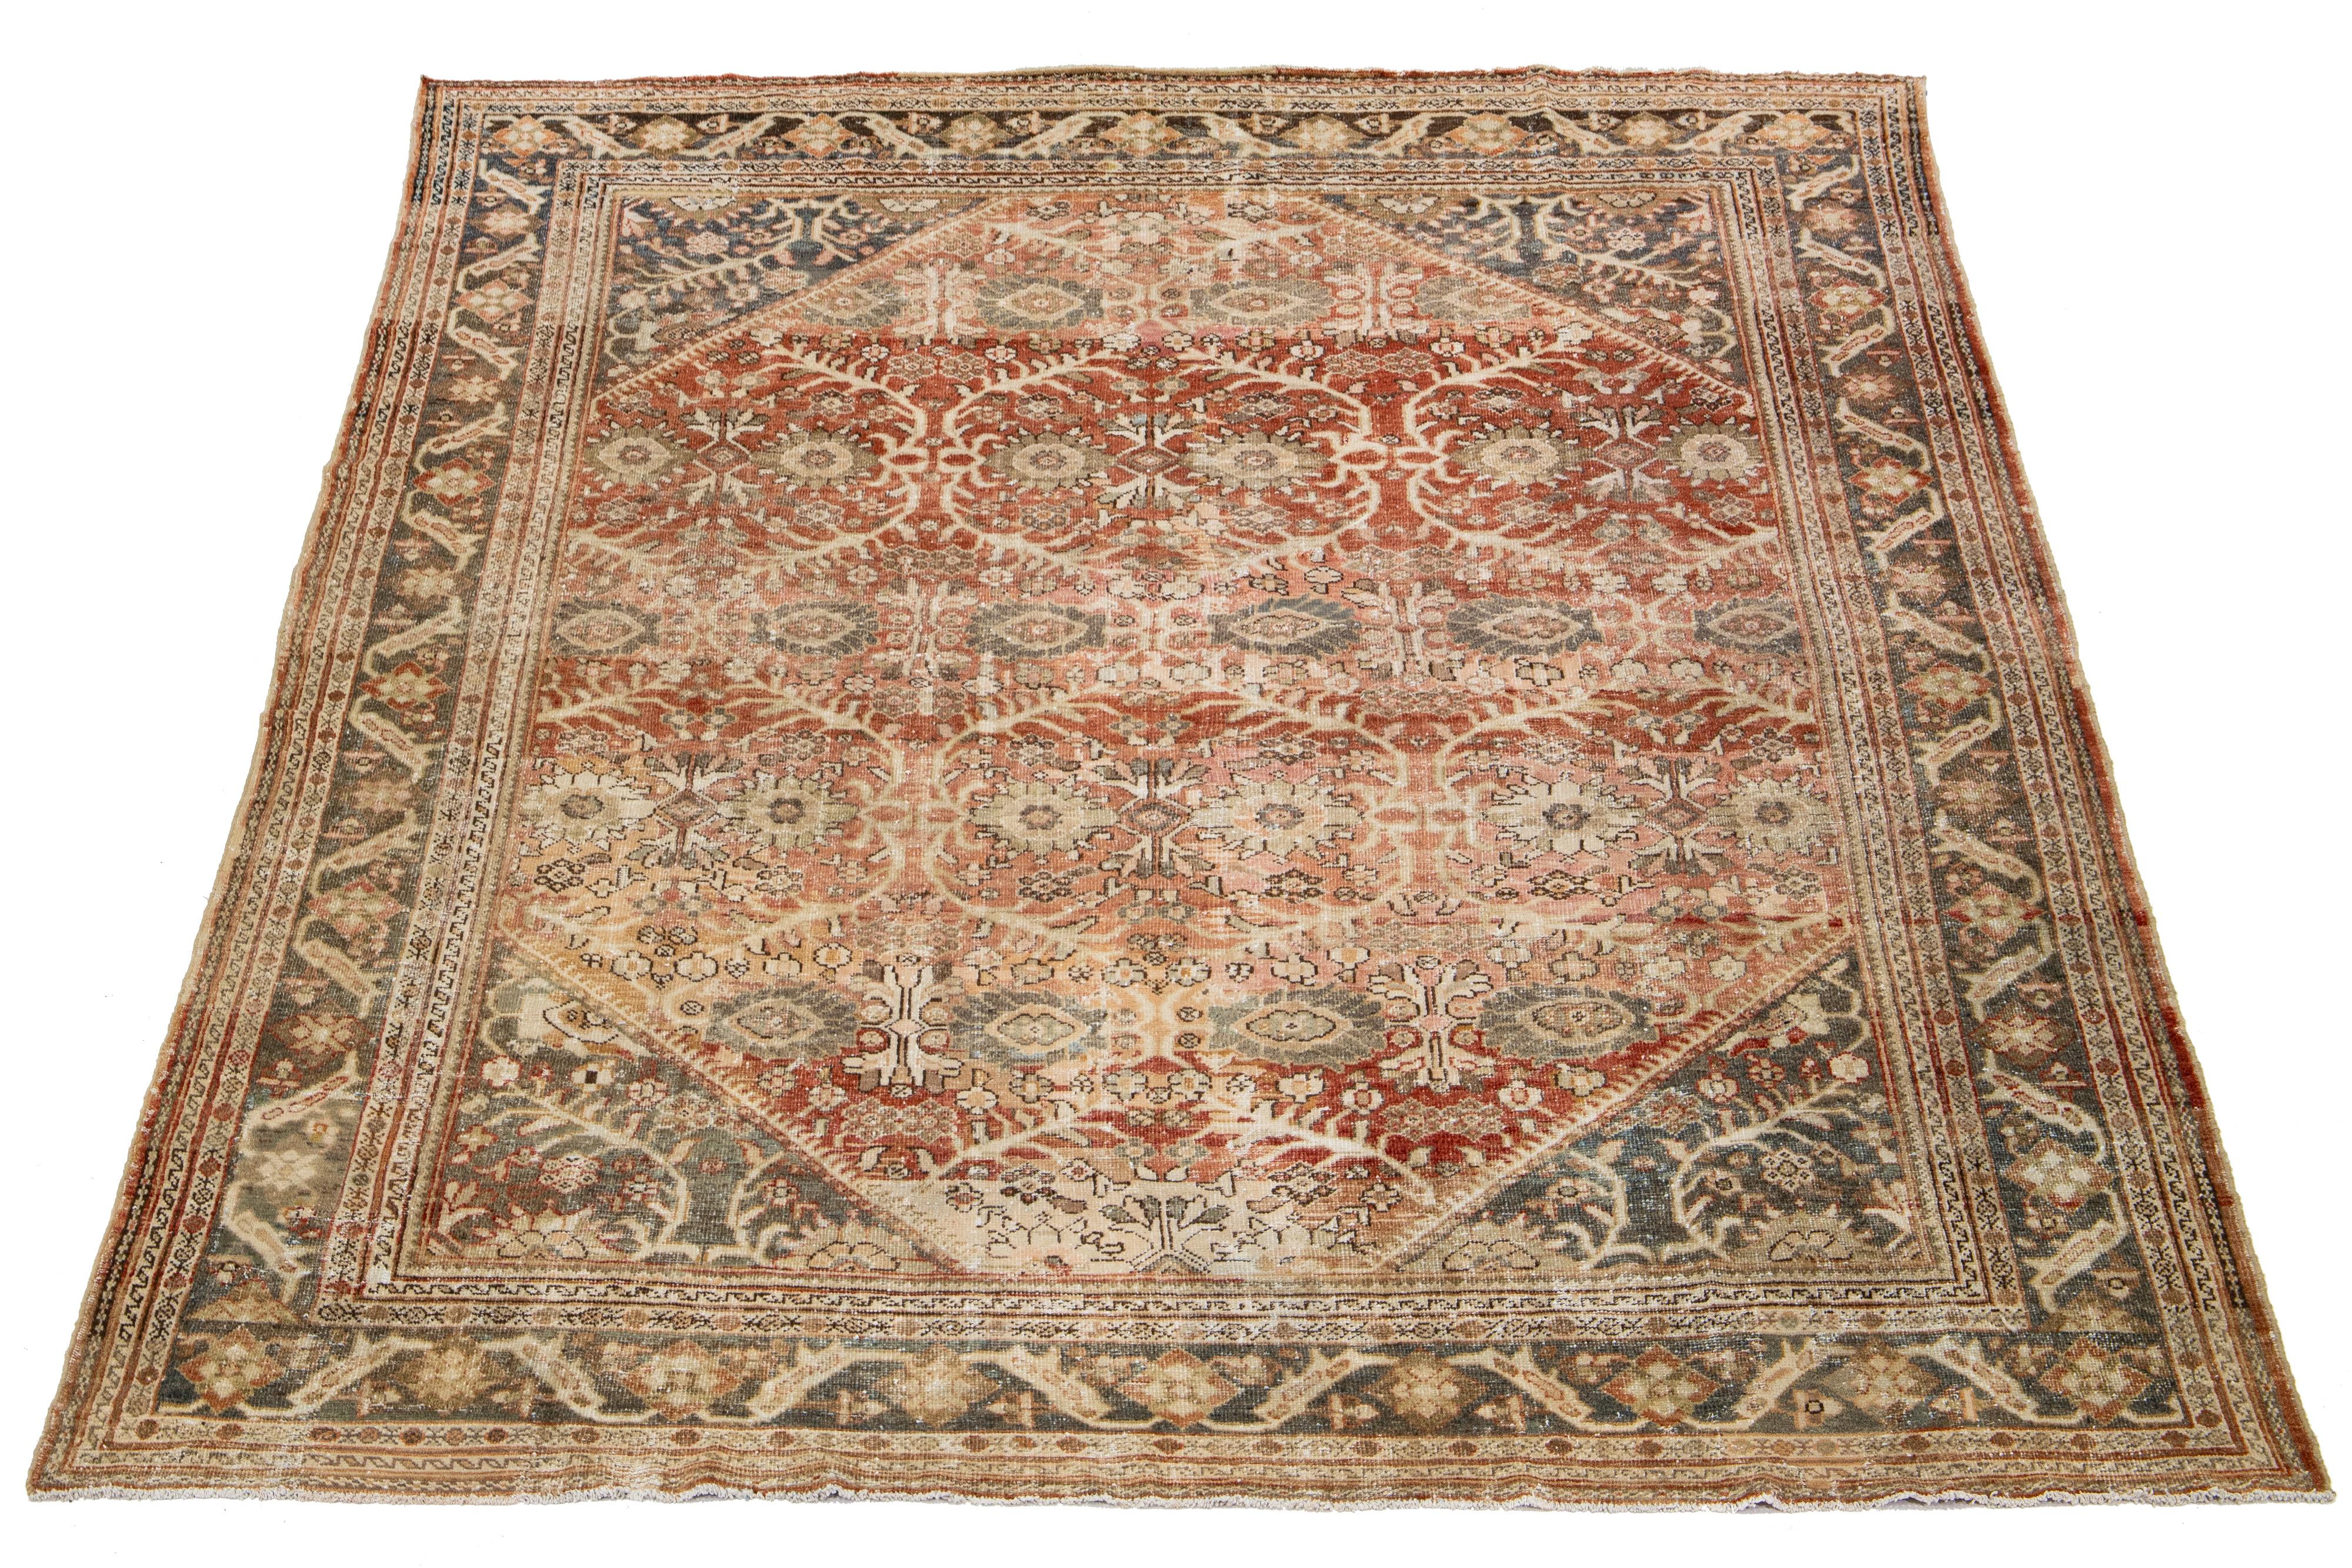 Hand-knotted wool Persian rug with rust field and floral motif in blue, pink, and brown hues.

This rug measures 9'10